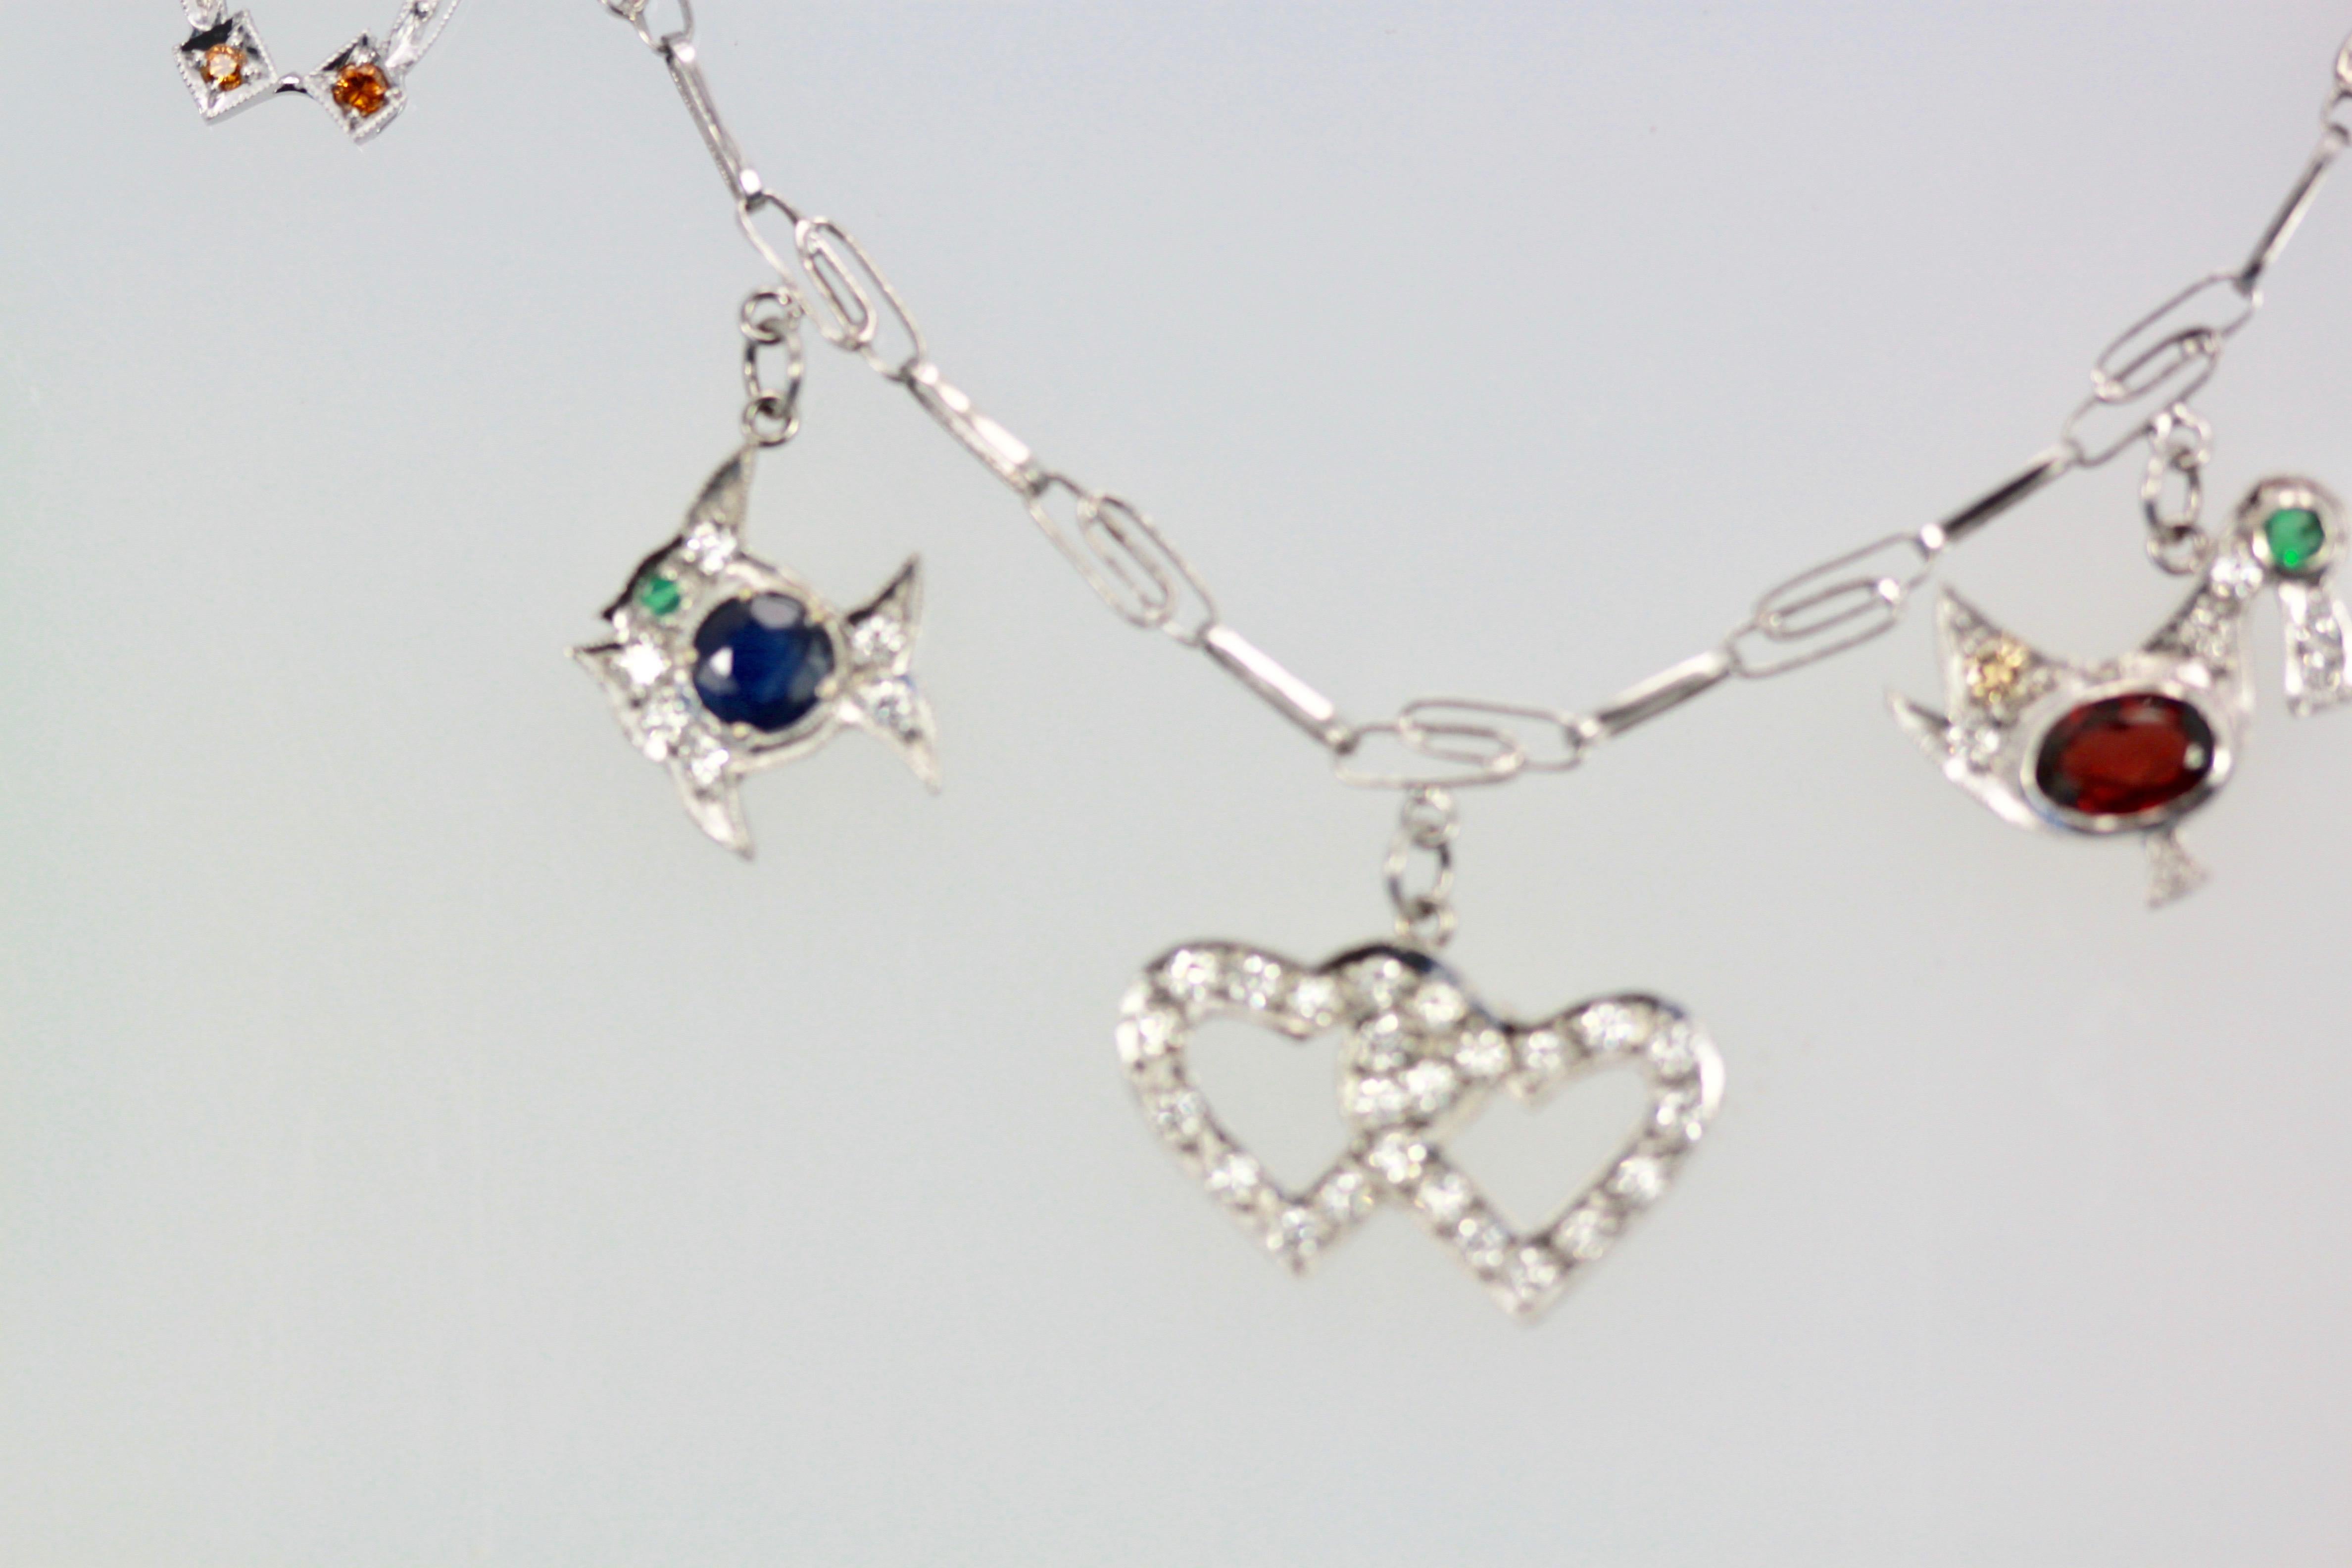 Gorgeous Deco Charm Necklace holds 7 unique charms, they are Palm Tree, Umbrella, Fish, Double Heart, Horseshoe, bird and seagull.  These are all complete  with Diamonds and other gemstones such as, Topaz, Garnet, Ruby, Emerald, and Sapphire. This